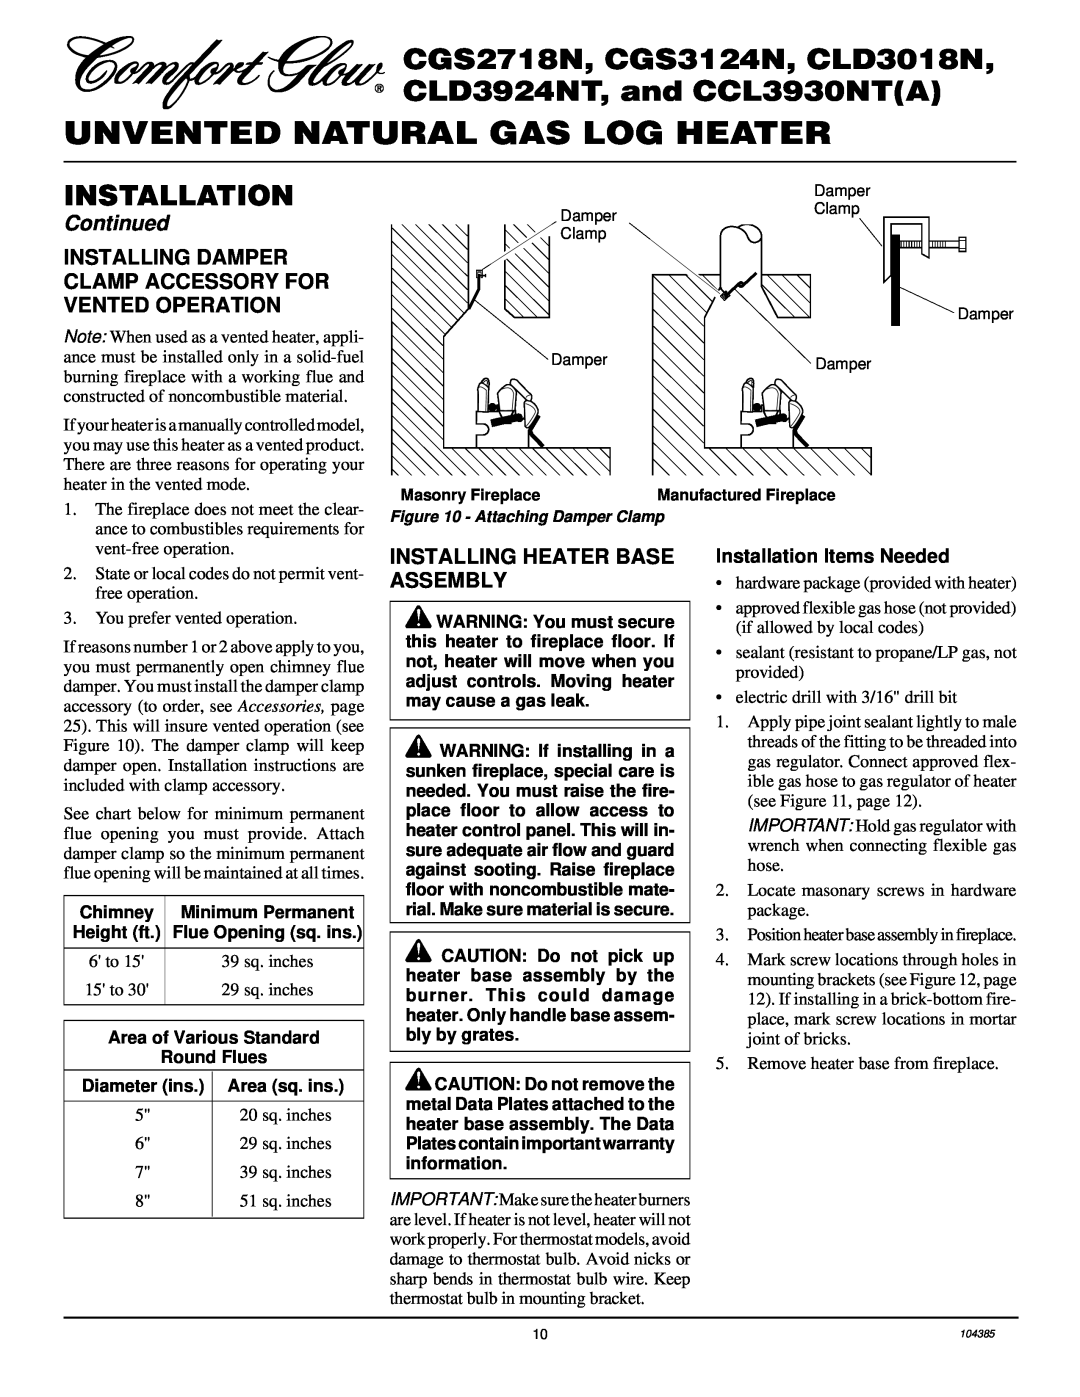 Desa CLD3924NT Installing Heater Base Assembly, Unvented Natural Gas Log Heater, CGS2718N, CGS3124N, CLD3018N, Continued 